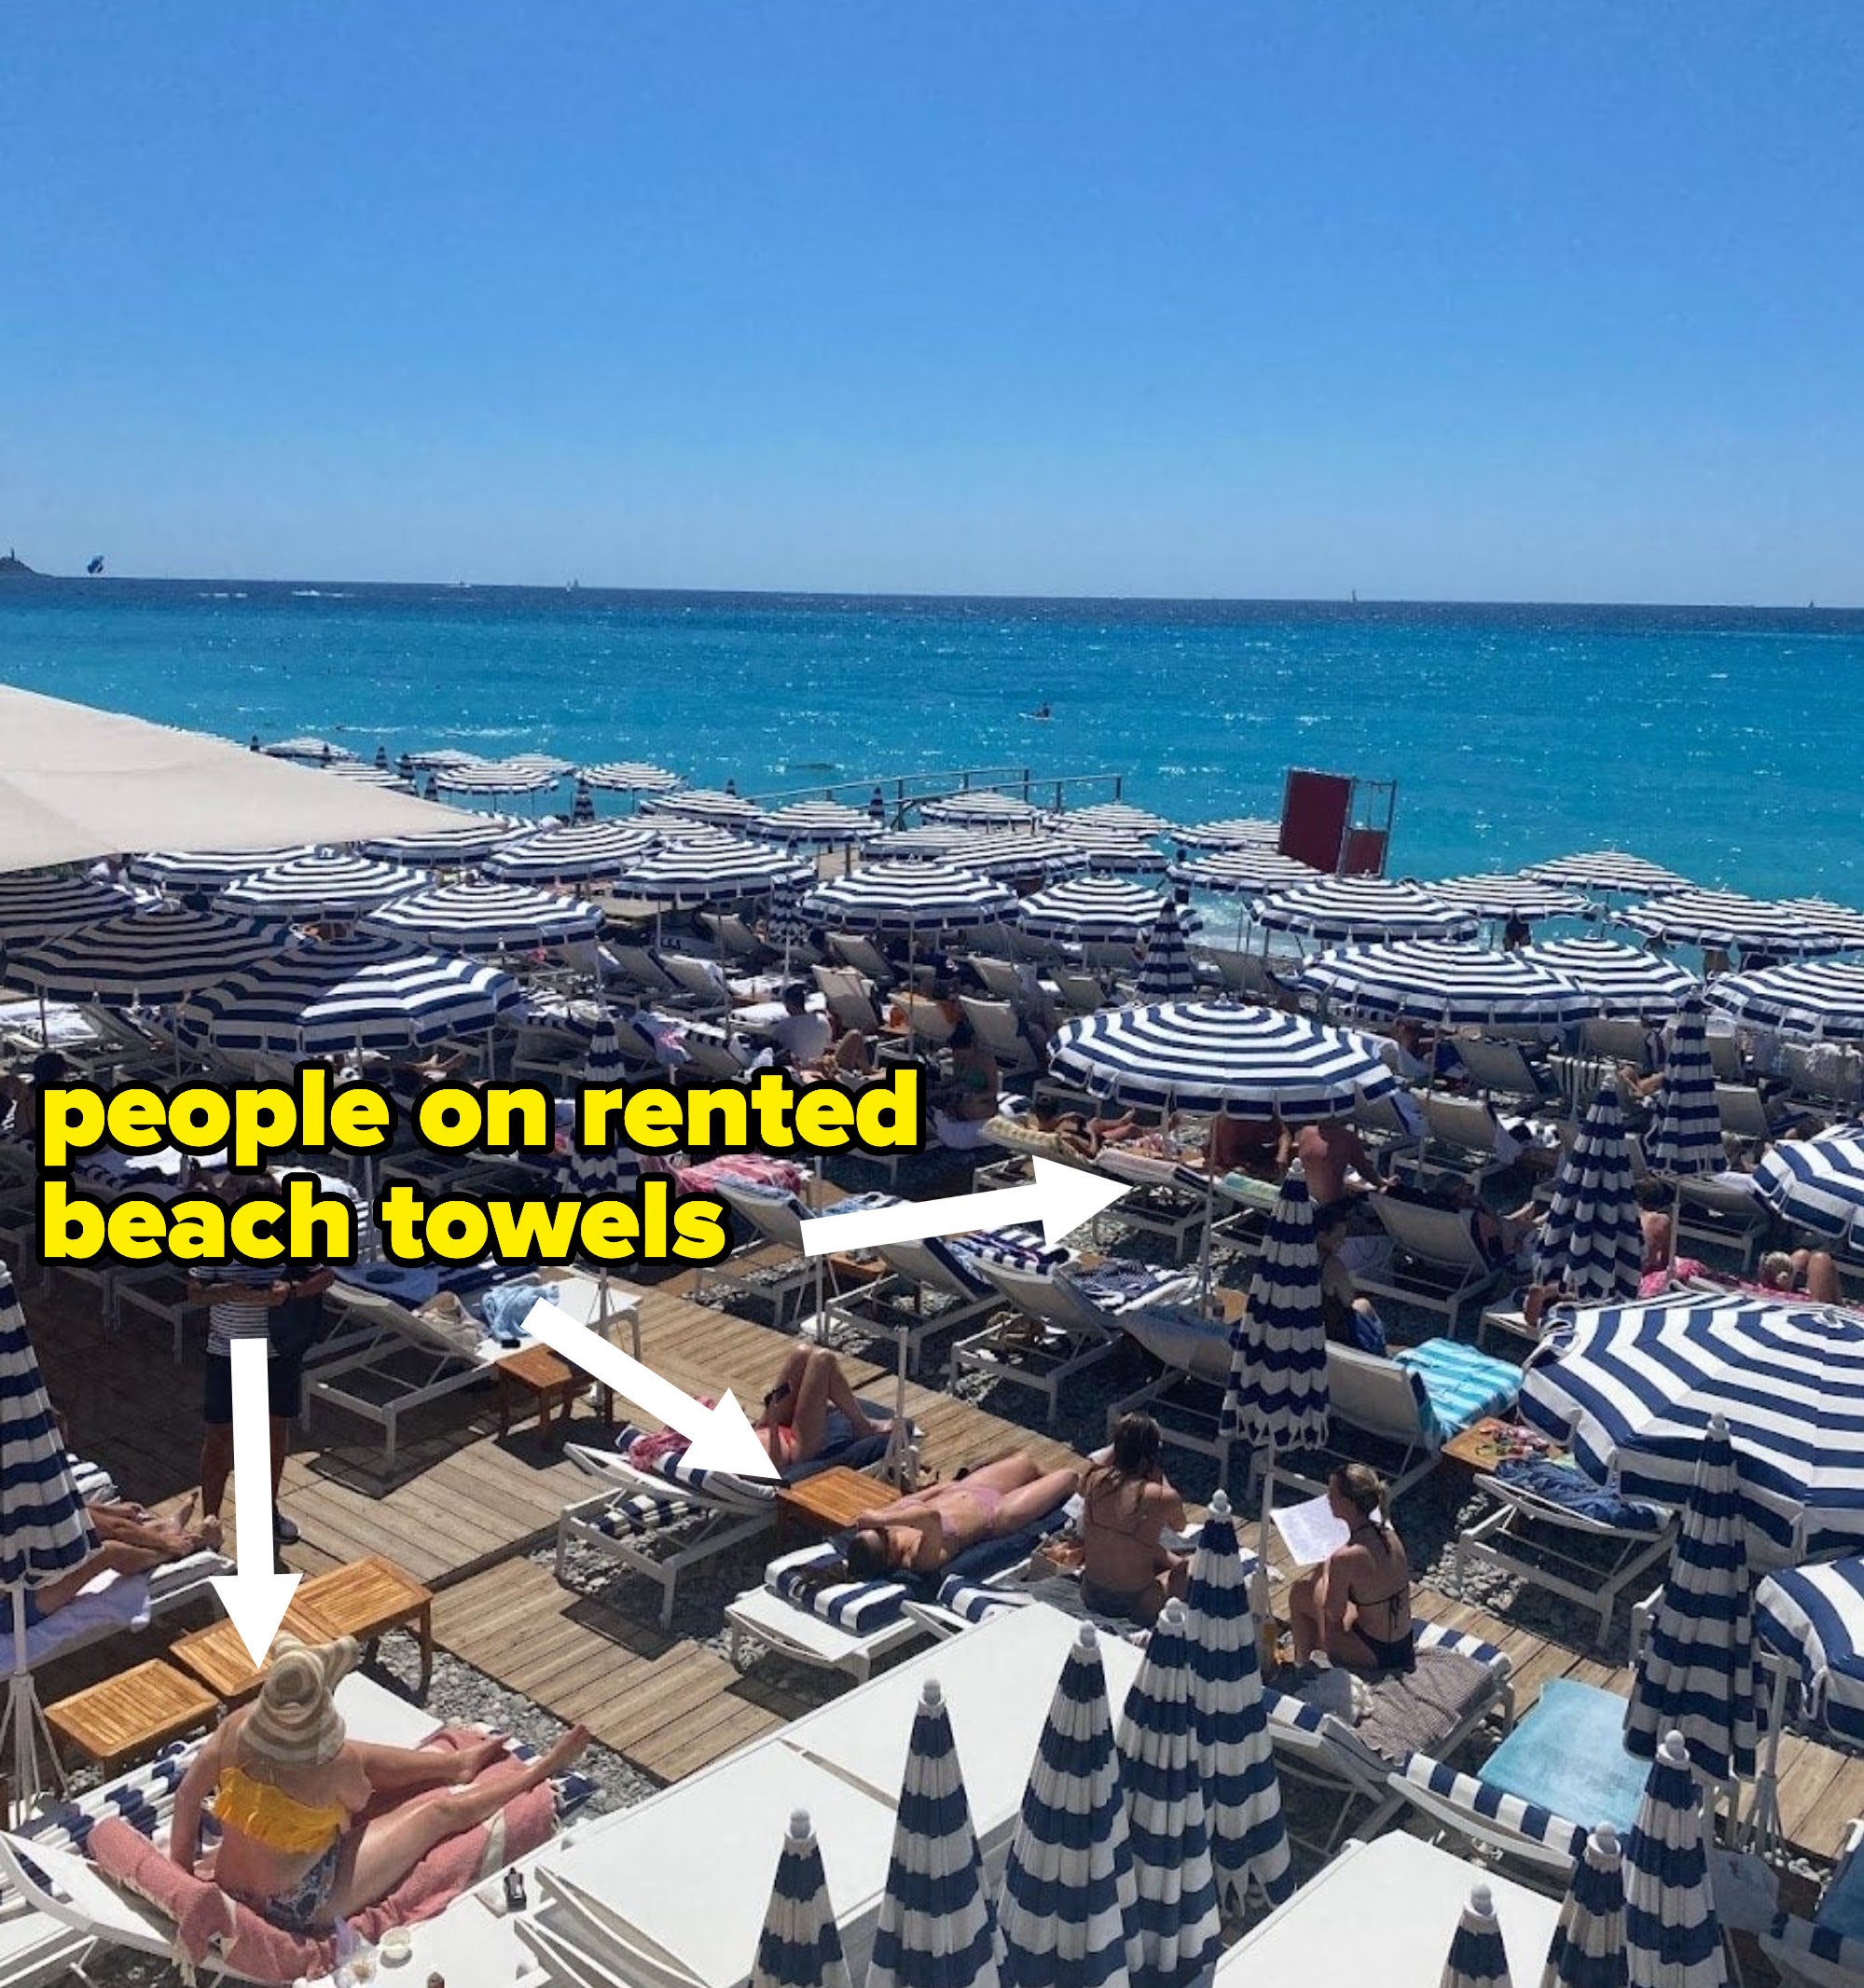 Arrow pointing to people on rented beach towels under an umbrella